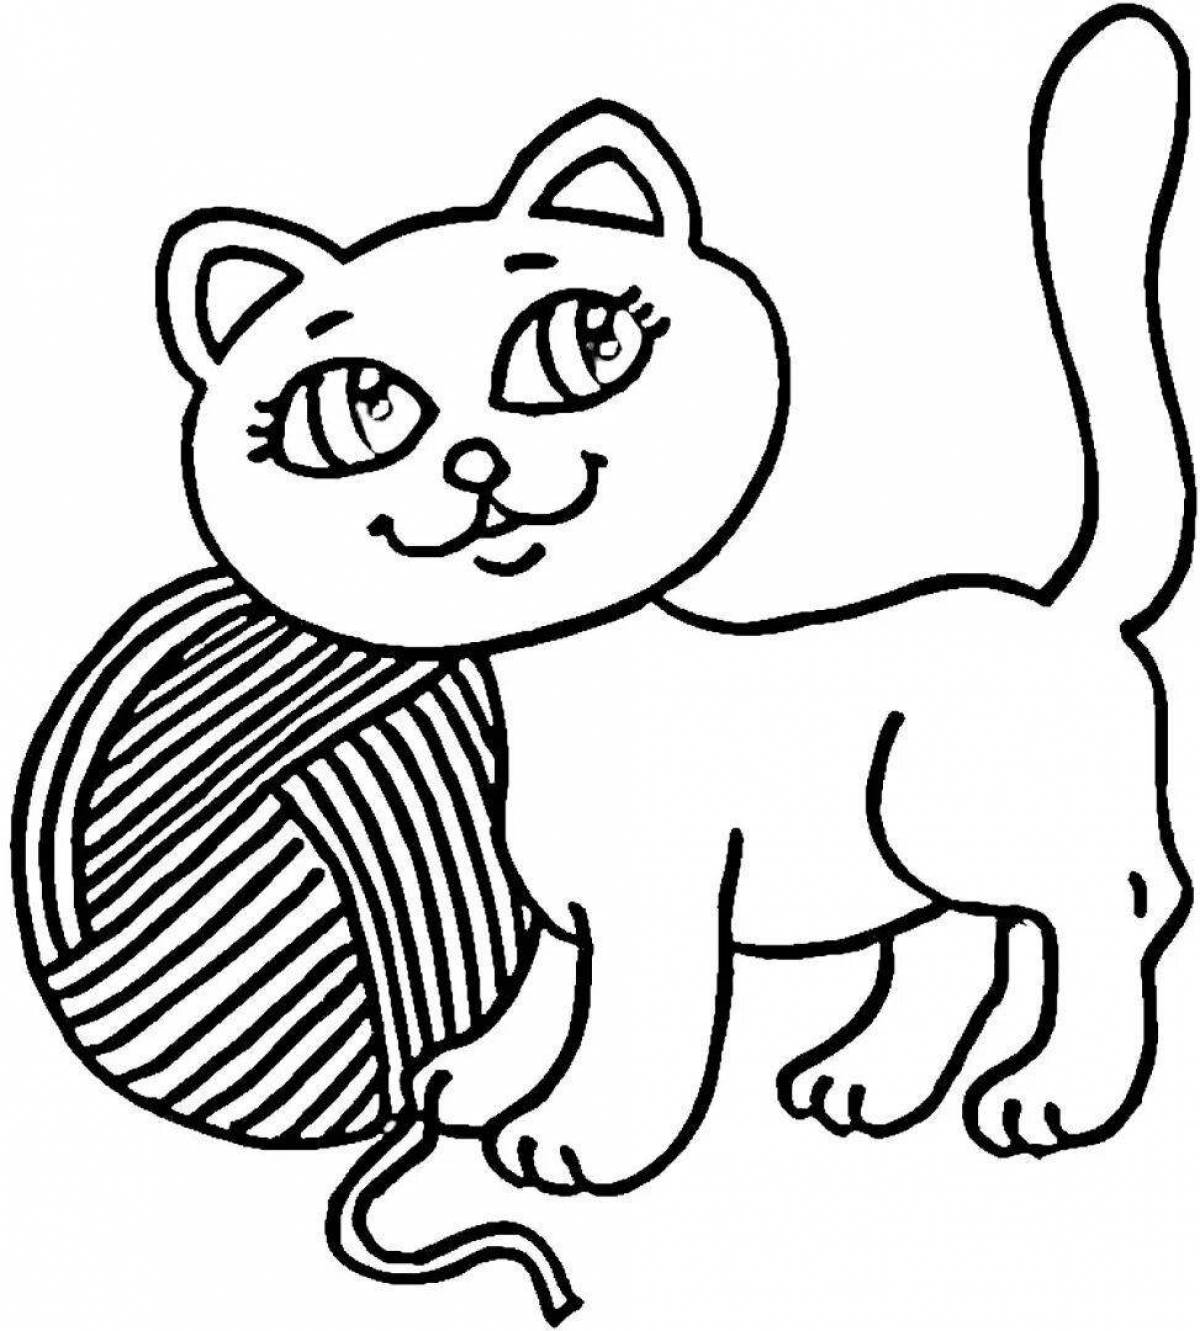 Coloring page inquisitive kitten with a ball